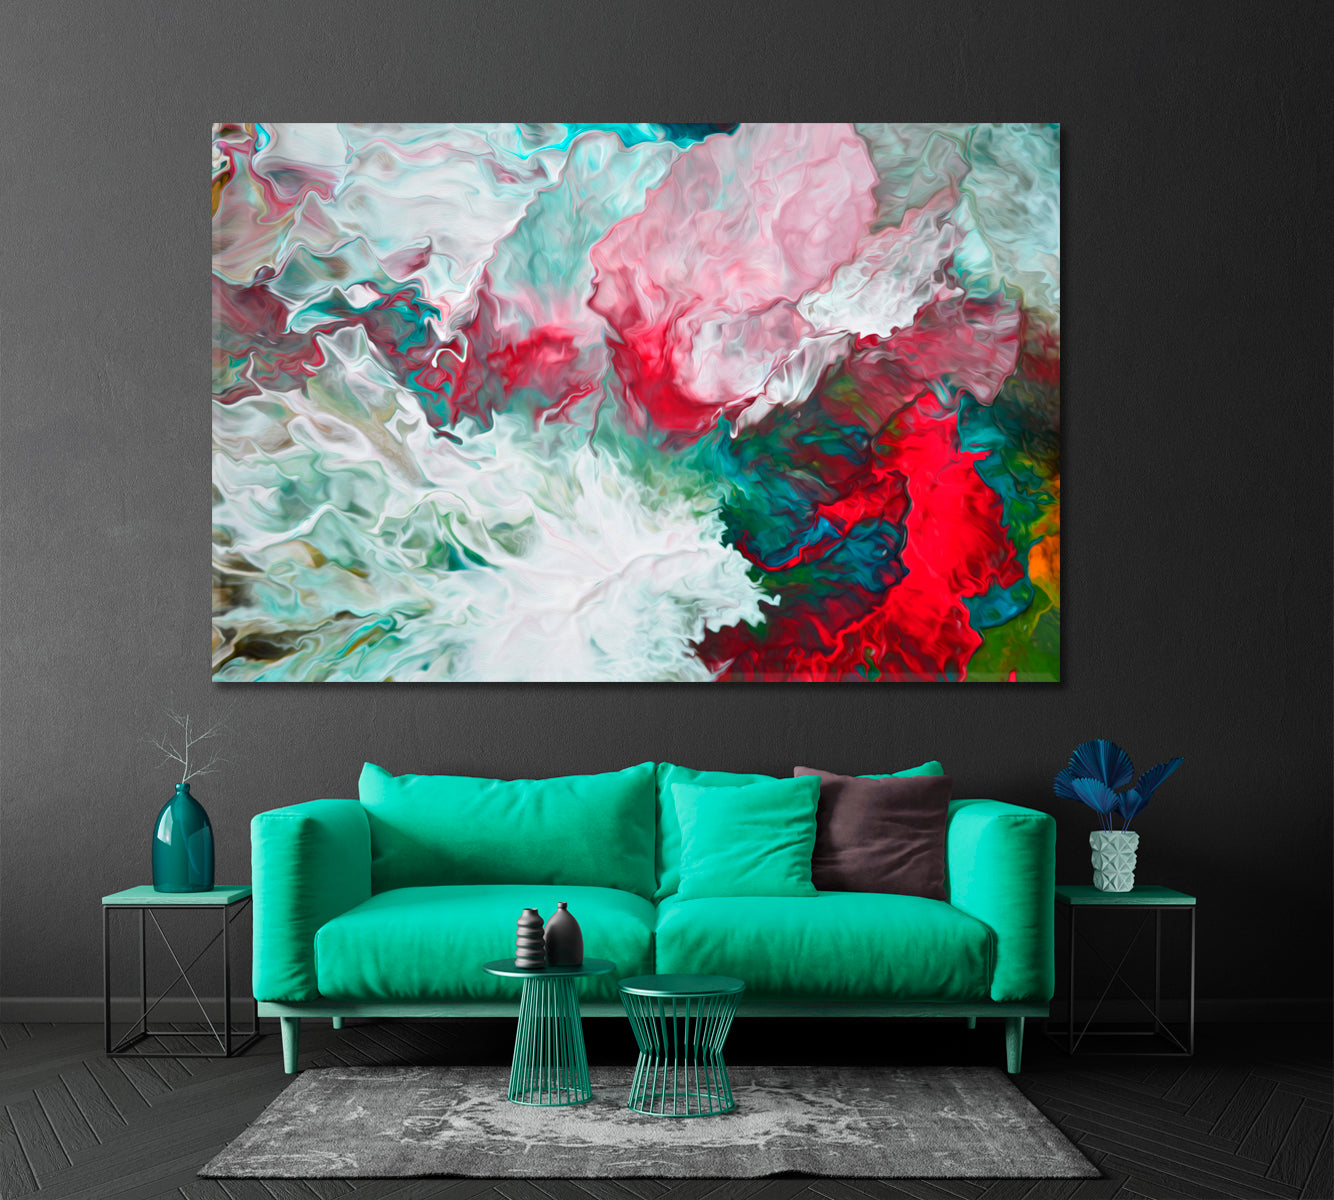 Multi-colored Abstract Mixture of Colors Artwork Fluid Art, Oriental Marbling Canvas Print Artesty 1 panel 24" x 16" 